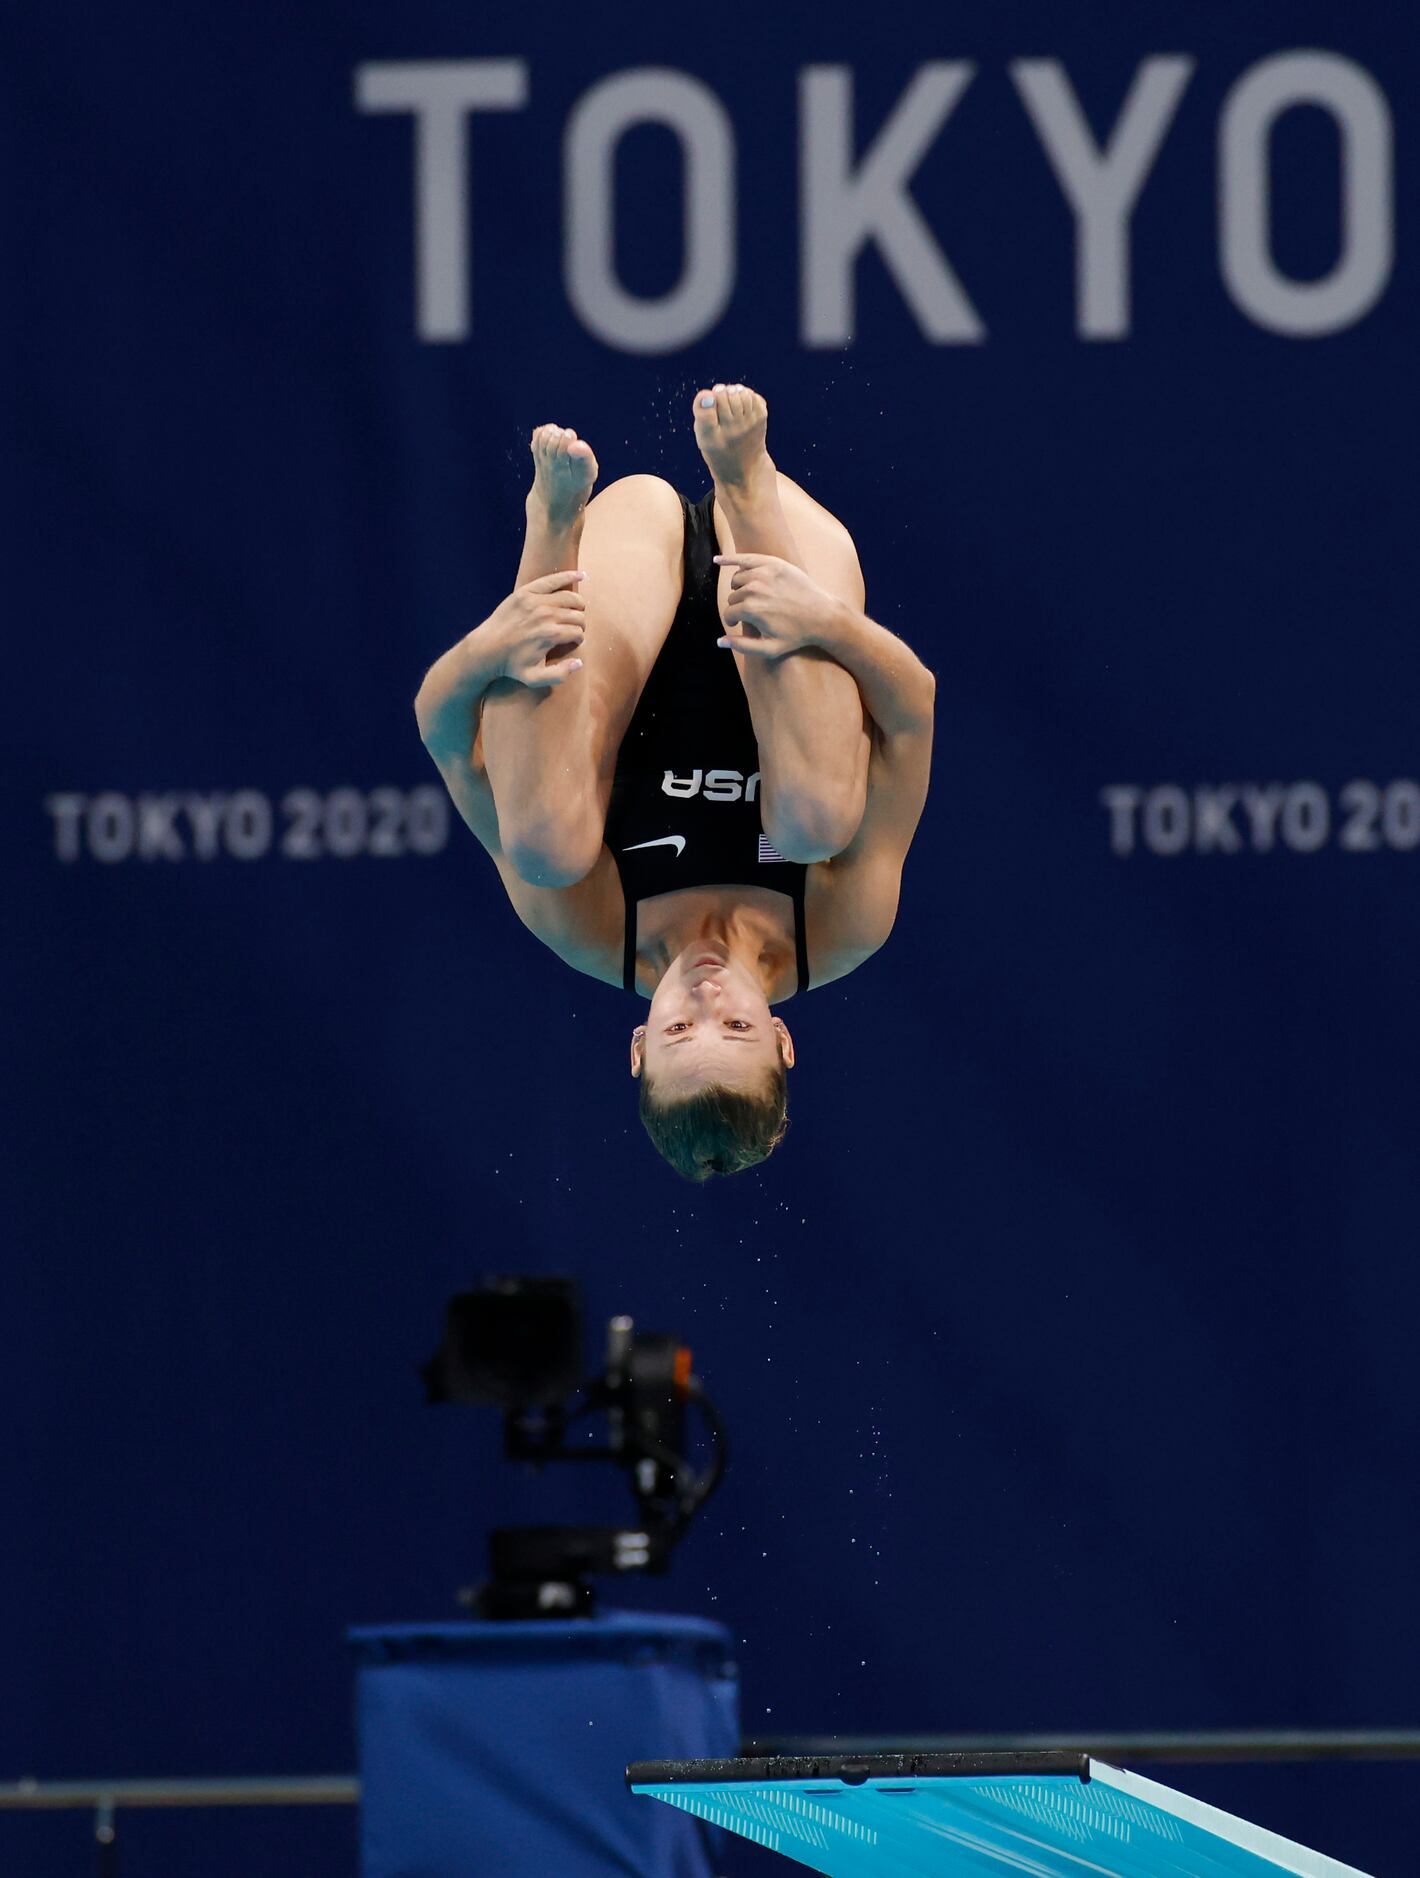 USA’s Hailey Hernandez dives in round 1 of 5 in the women’s 3 meter springboard semifinal...